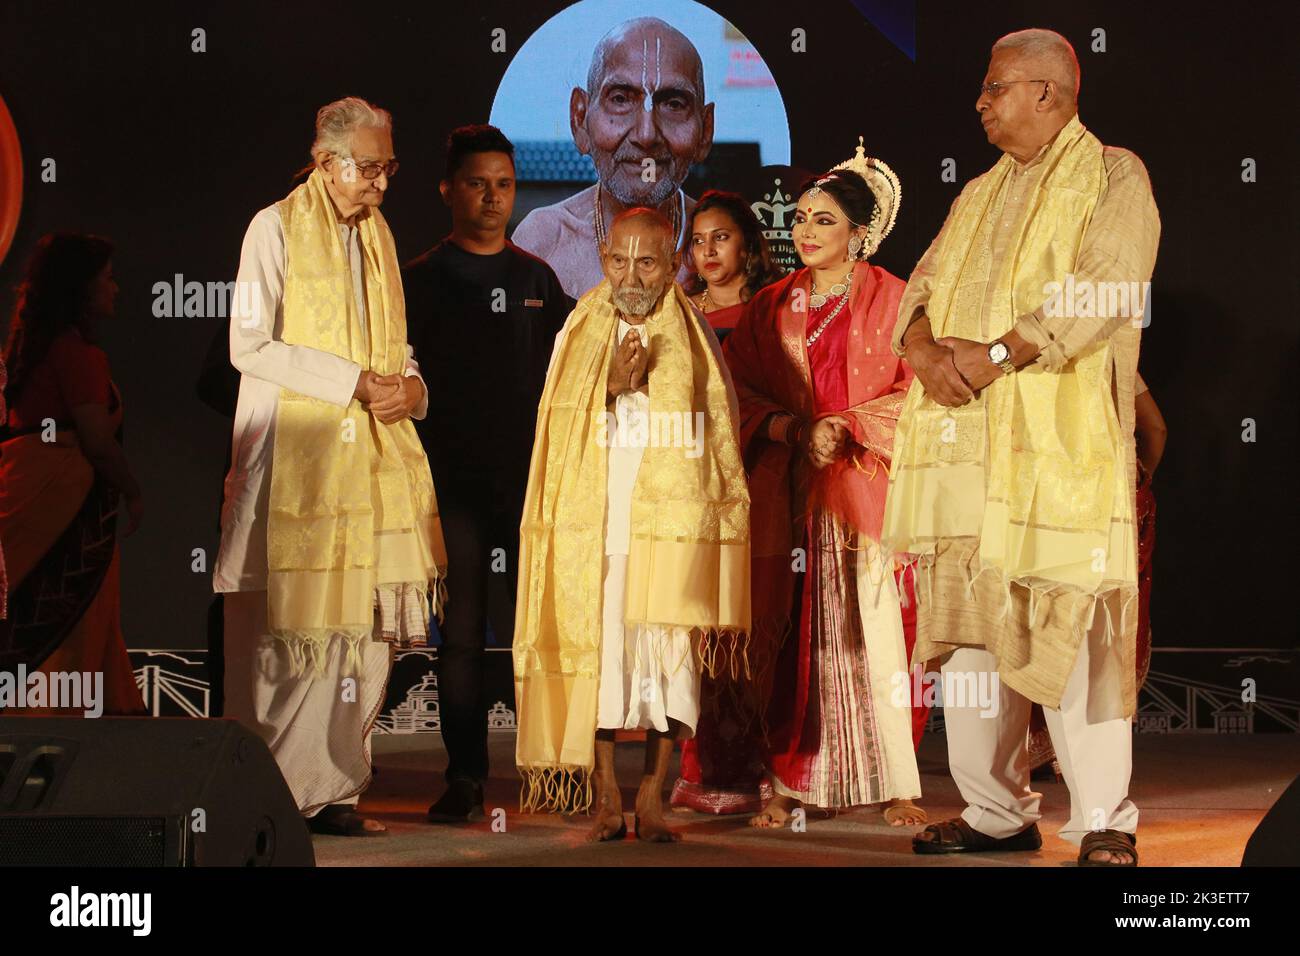 Kolkata, West Bengal, India. 25th Sep, 2022. 125-year-old yoga guru Swami Sivananda received the Bharat Dignity Awards 2022, presented by Tathagata Roy.Former Governor of Meghalaya, Indian Odissi dancer Guru Sanchita Bhattacharyaa in Kolkata. Swami Sivananda was born on August 8, 1896, according to his passport. If true, his life would have spanned three centuries, but despite his apparent age he remains strong enough to perform yoga for hours at a time. He is now applying to Guinness World Records to verify his claim. It currently lists Japan's Jiroemon Kimura, who died in June 2013 a Stock Photo